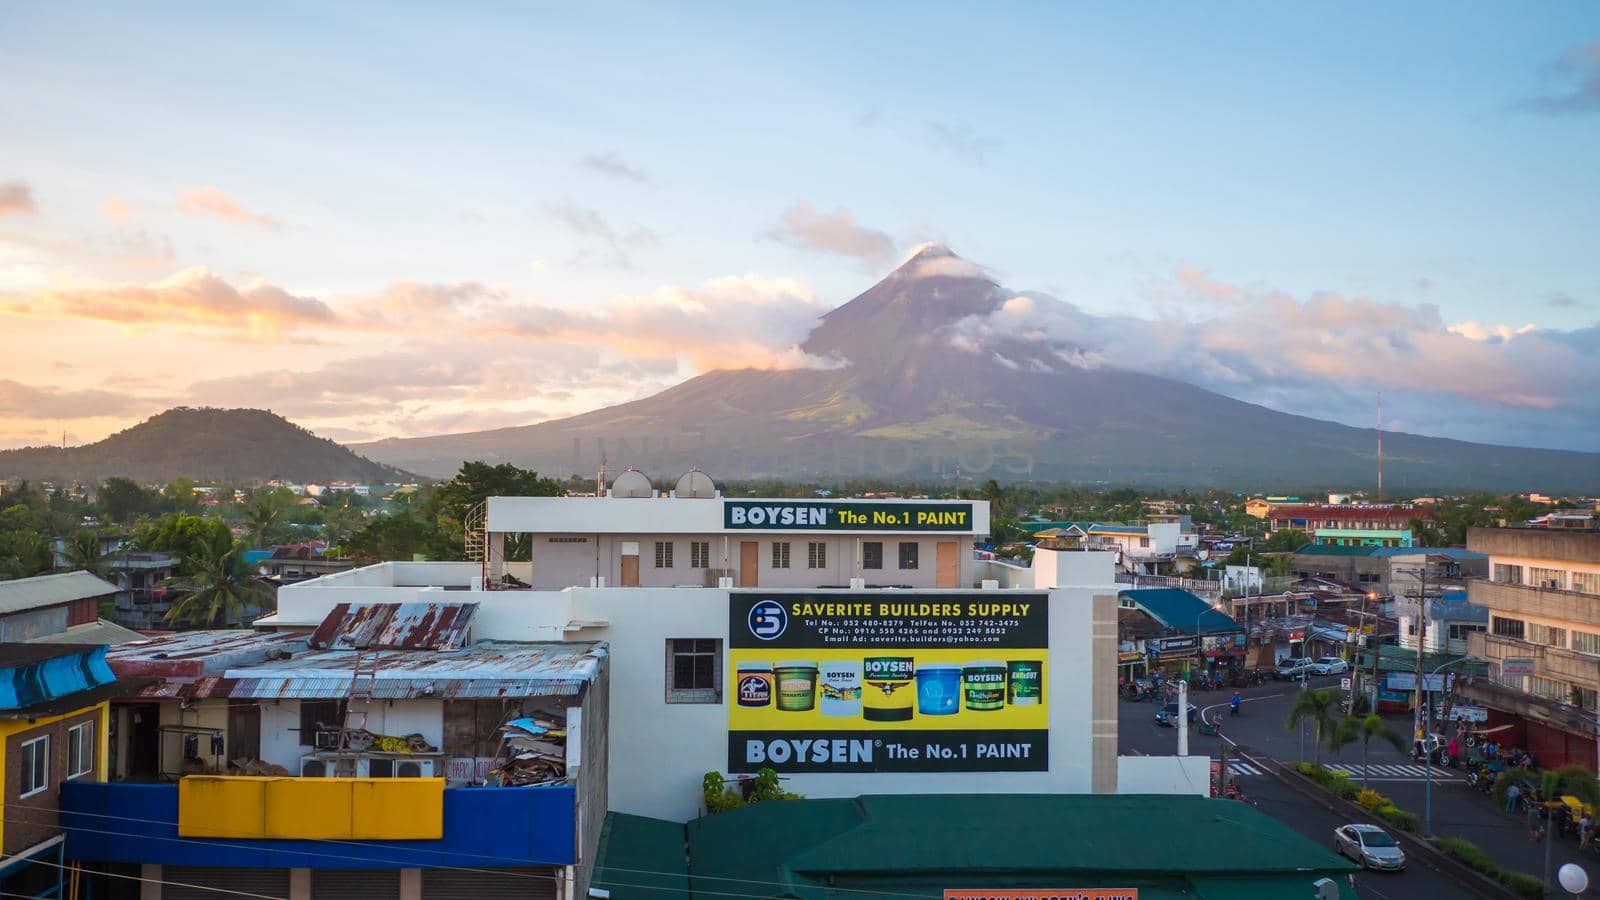 LEGAZPI, PHILIPPINES - JANUARY 5, 2018: - Mount Mayon volcano looms over the city as daily life goes on. by DovidPro